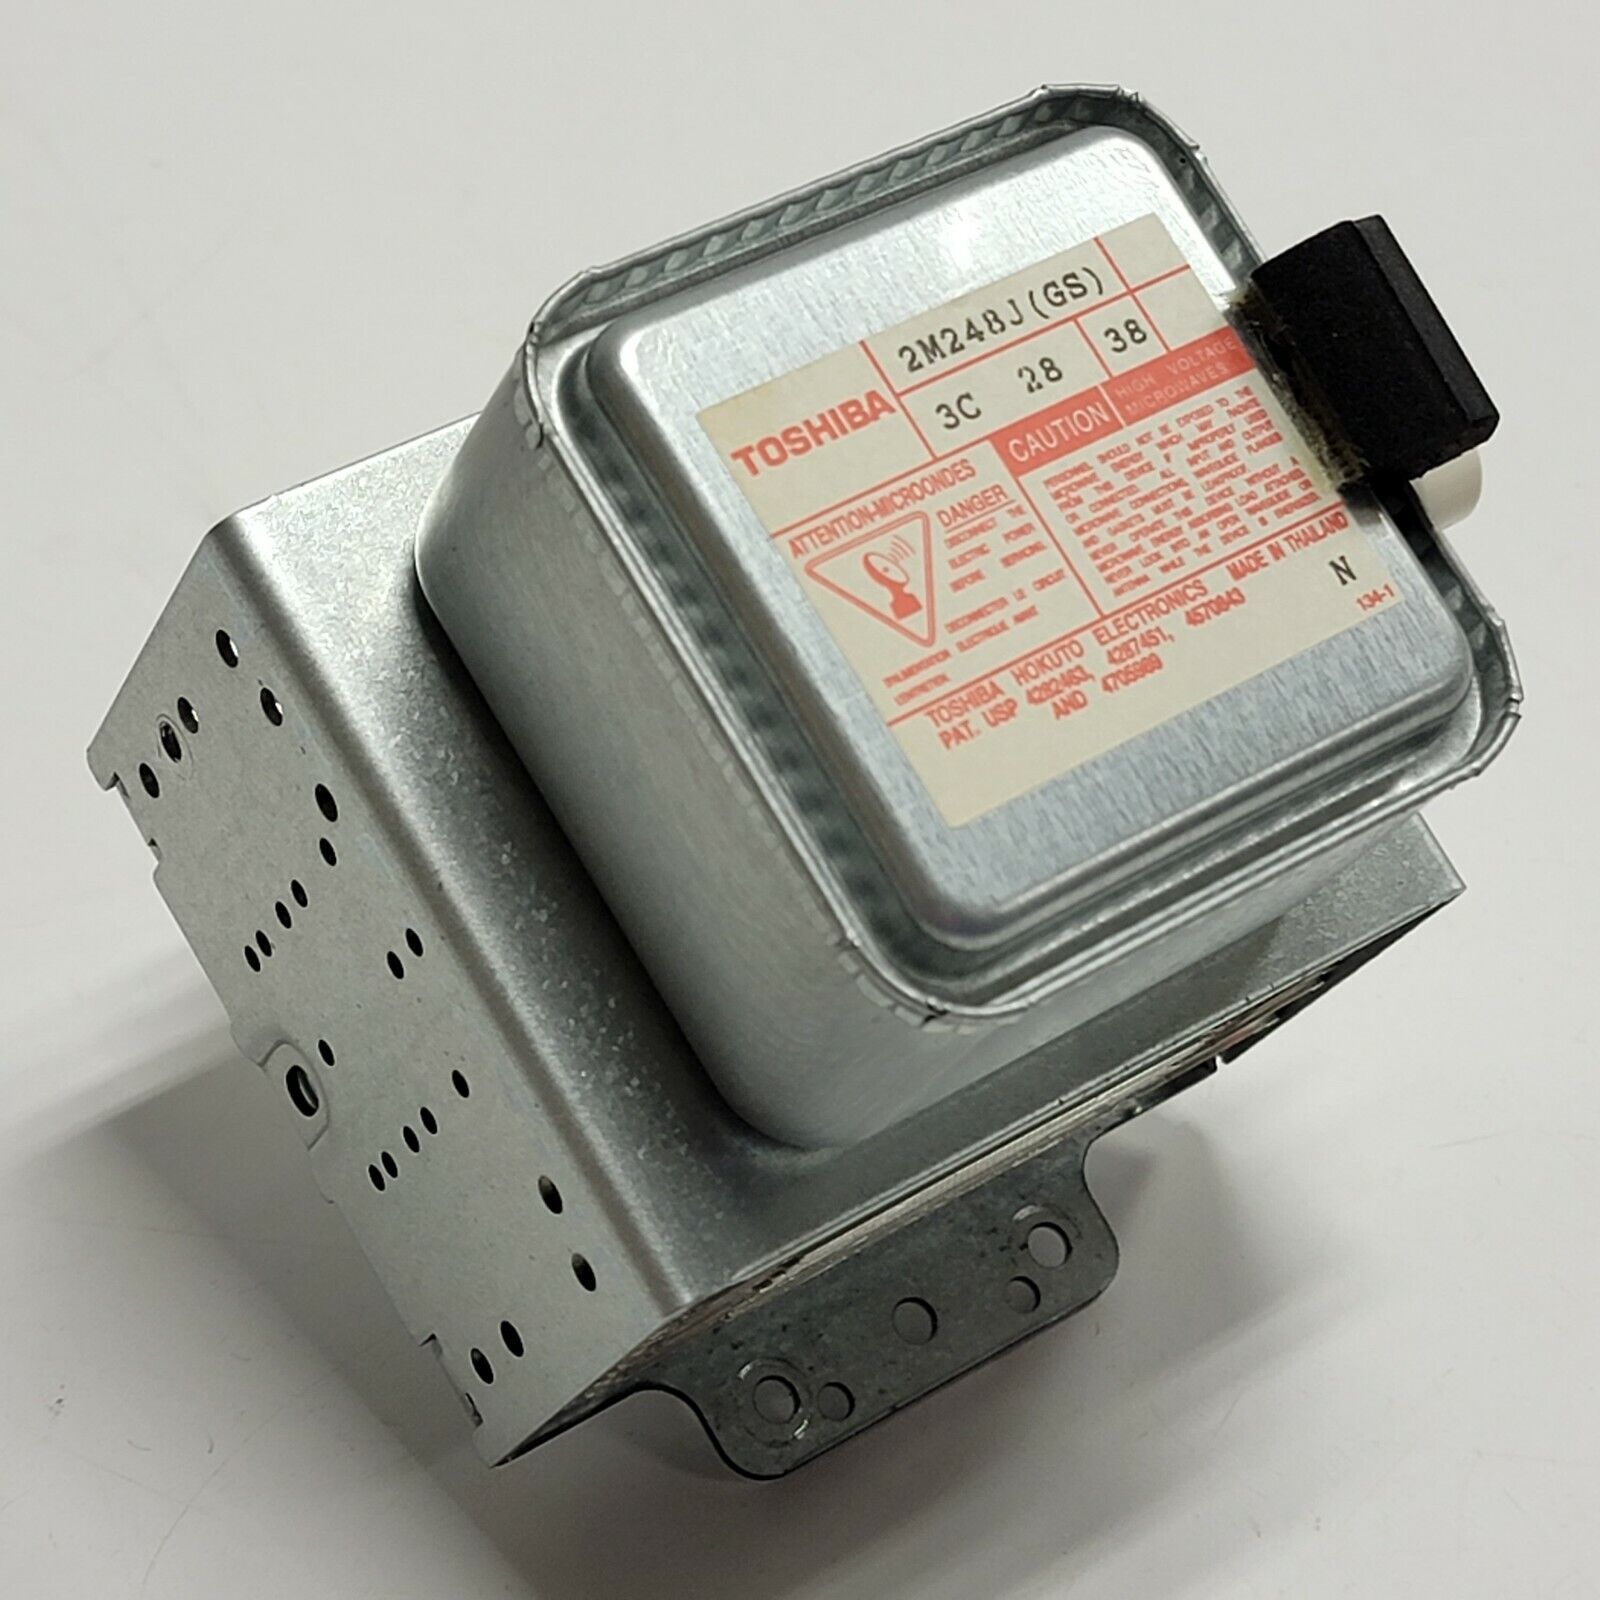 TOSHIBA Magnetron 2M248J (GS) Part from Amana Microwave Model AC